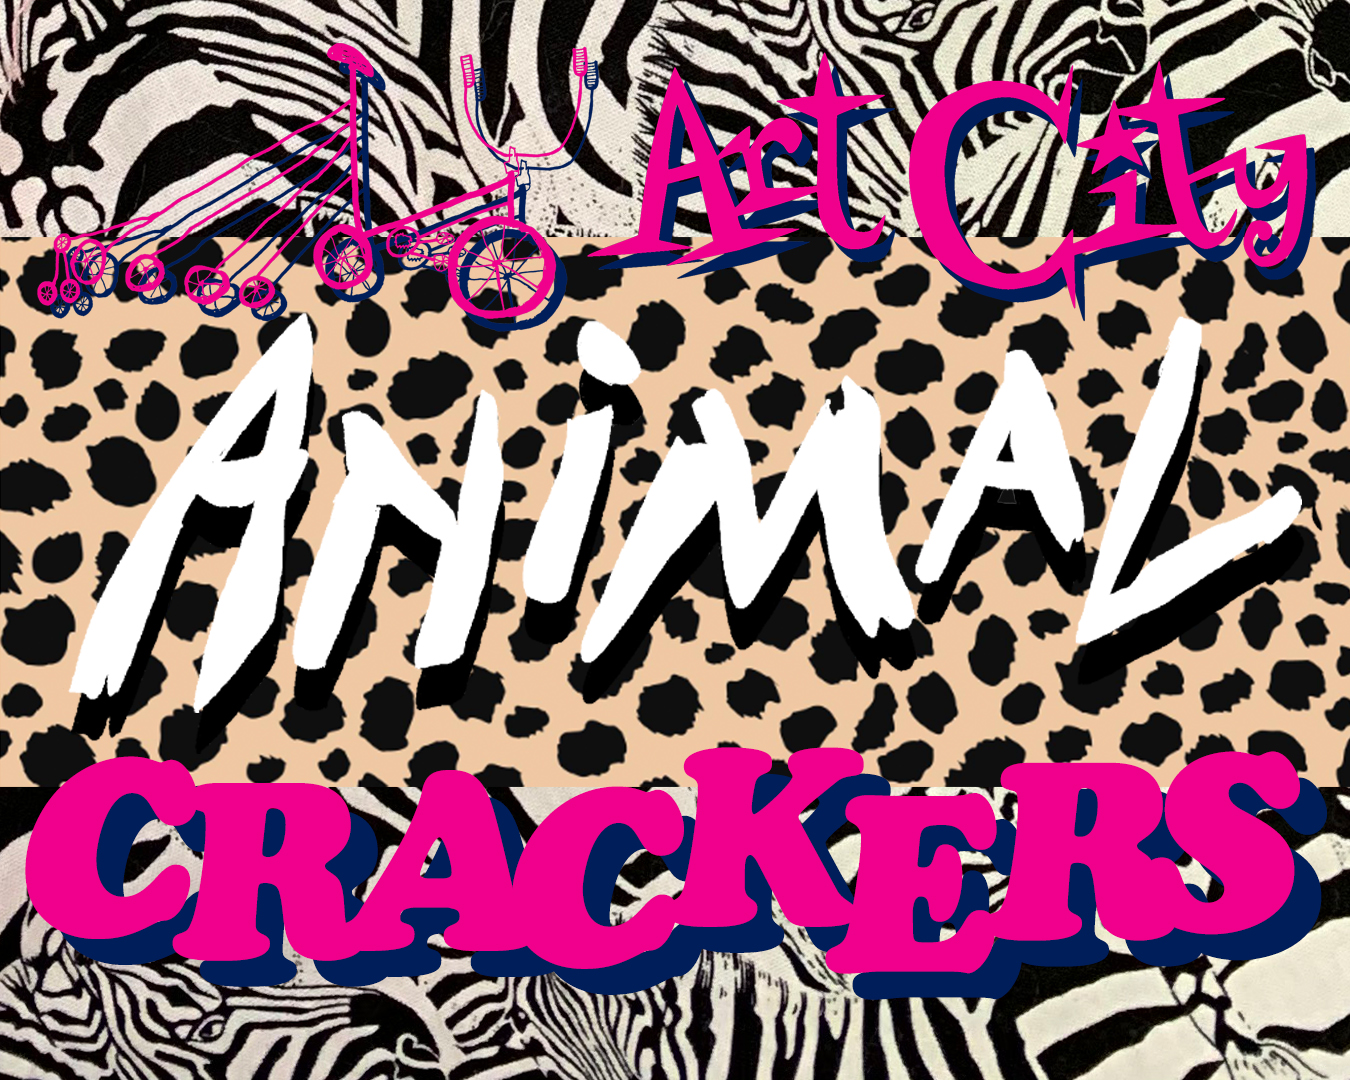 Art City logo and jazzy fonts saying  "animal Crackers" on leopard print and zebra print background.